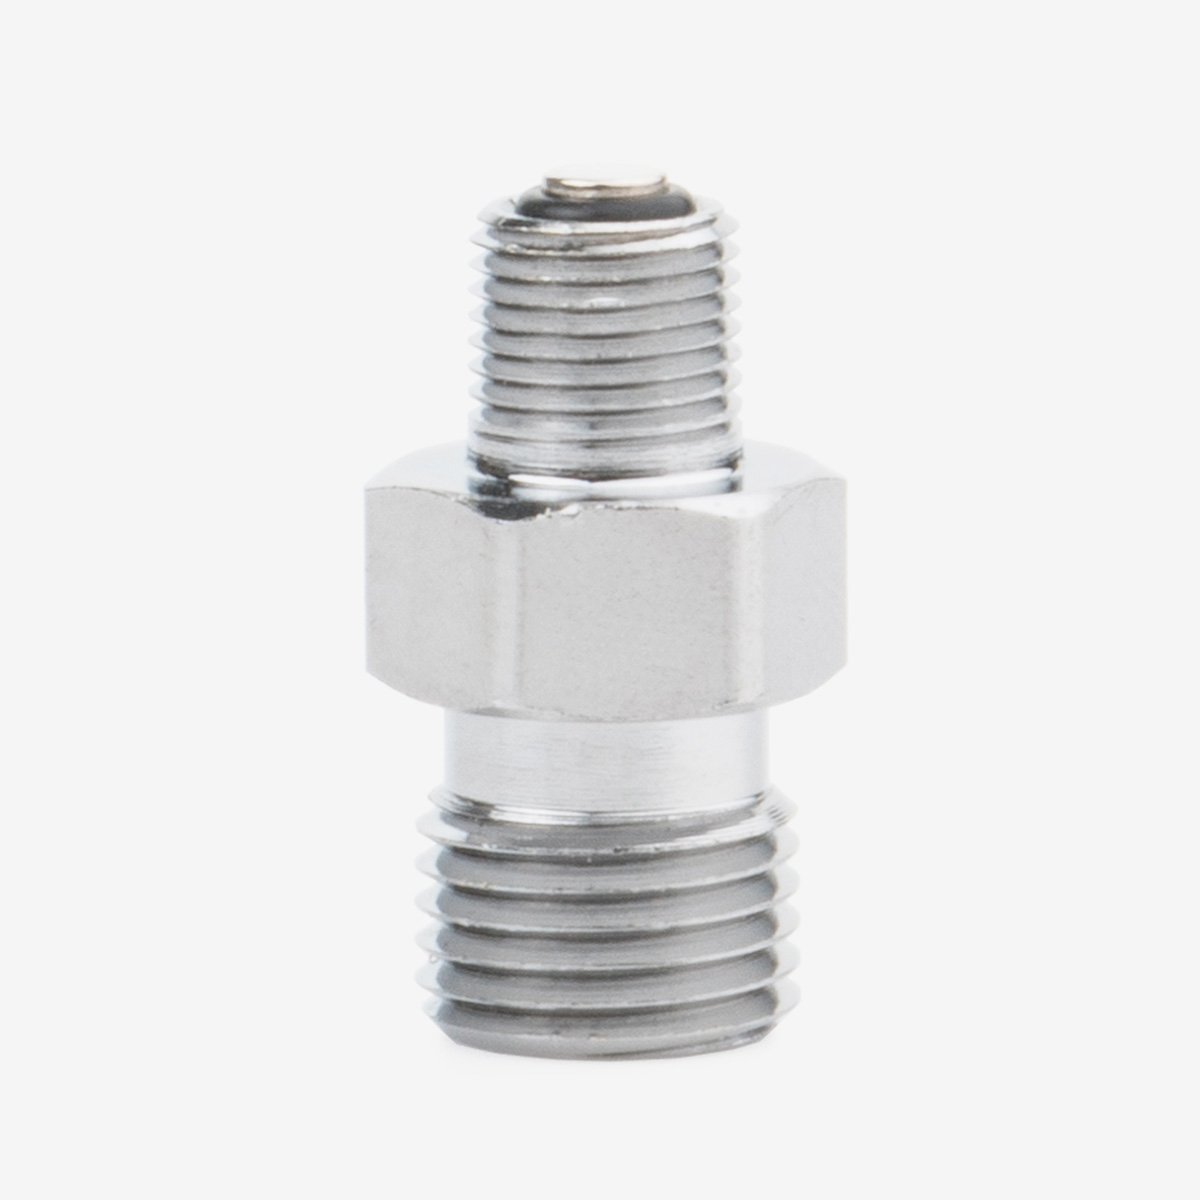 Silver 1/8th inch NPT DISS blender buddy fitting on white background